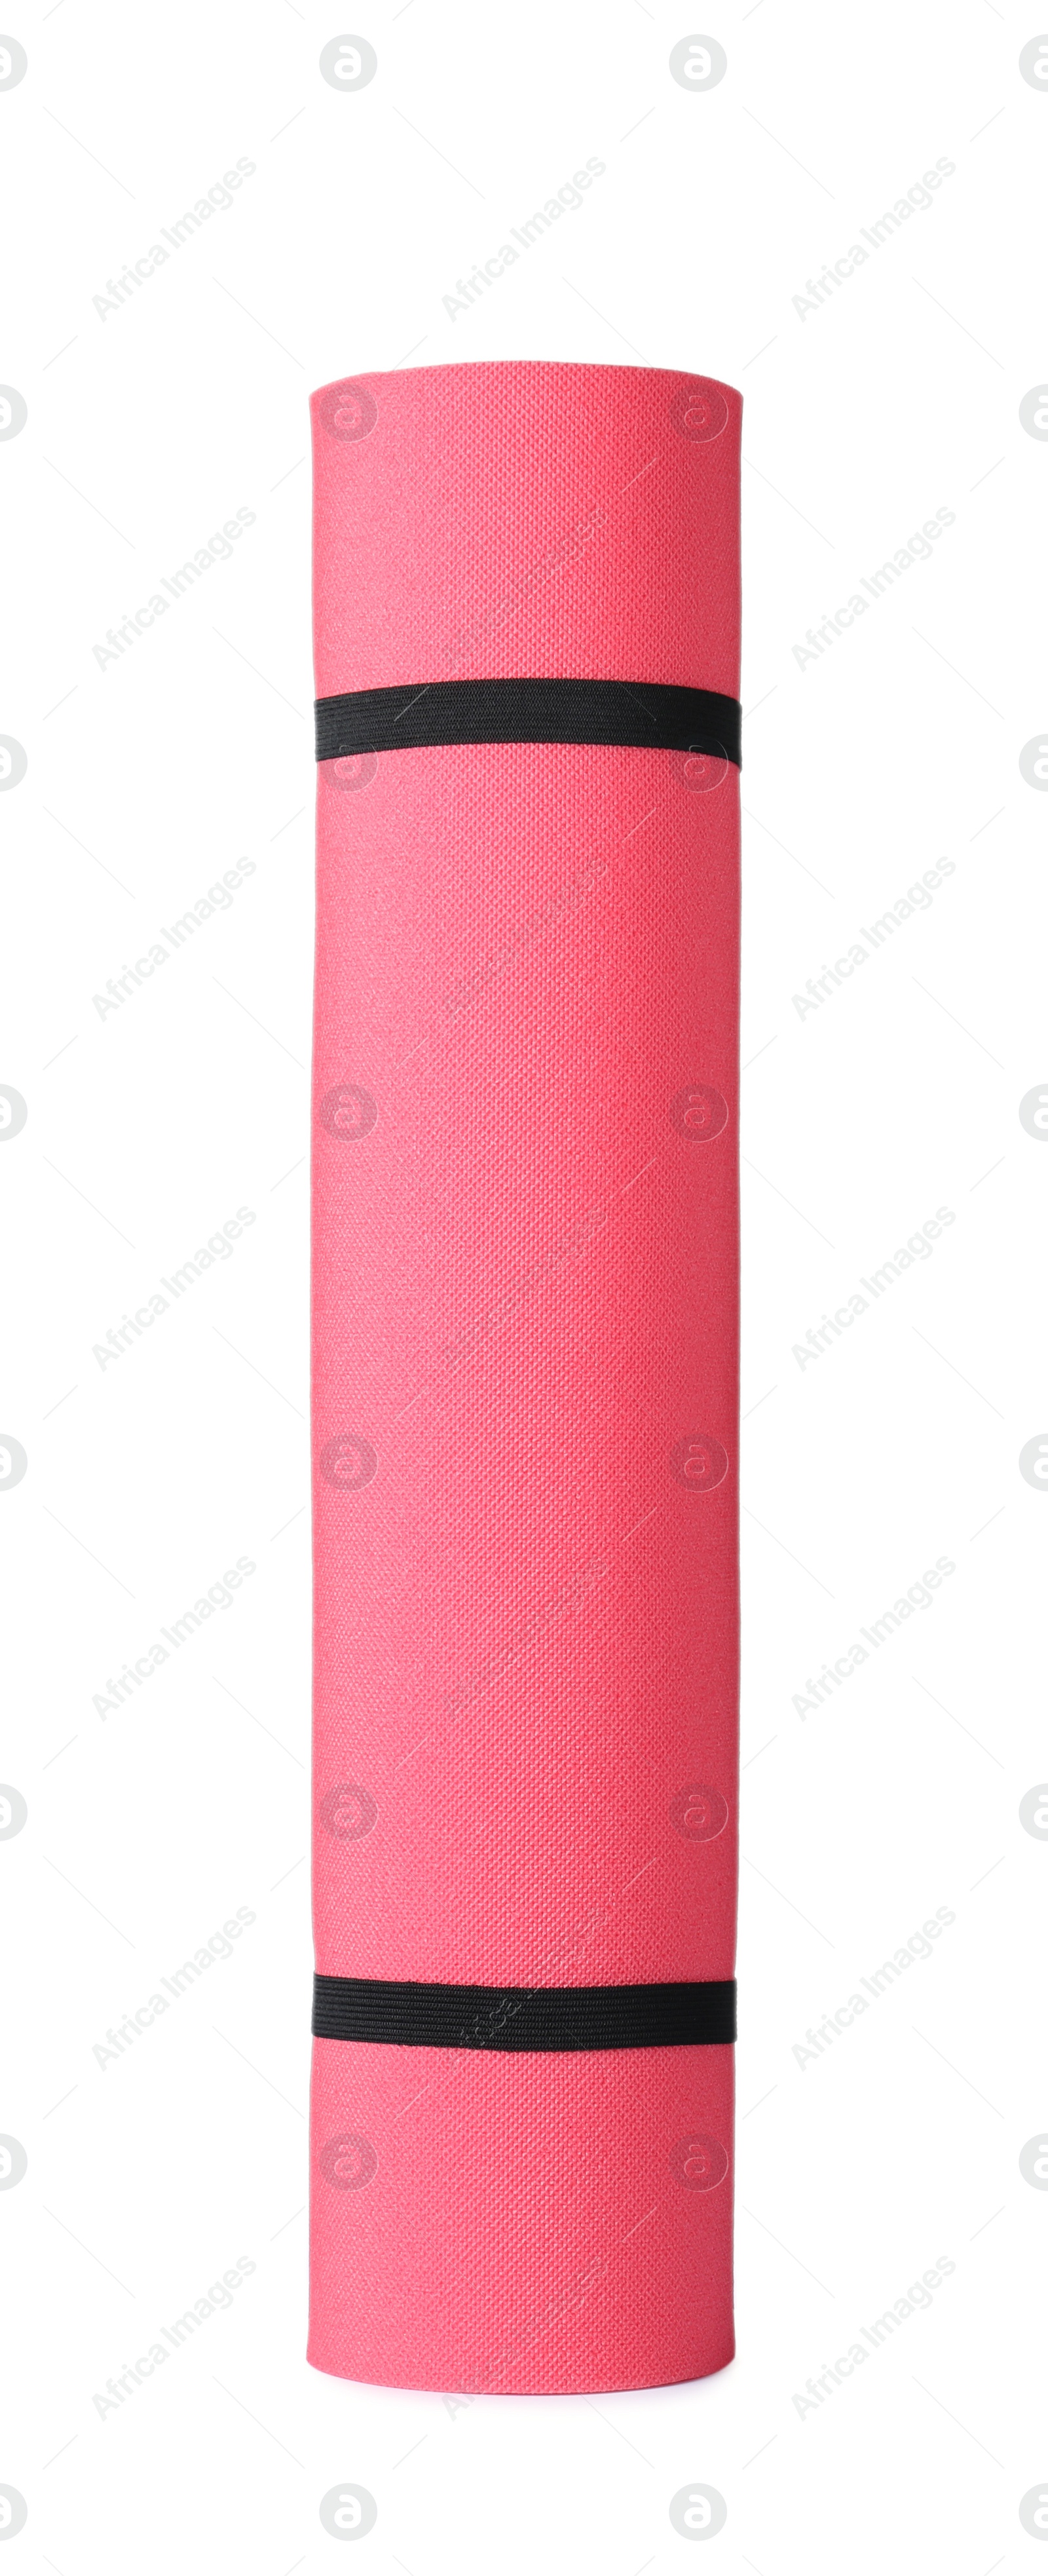 Photo of Rolled bright camping mat isolated on white